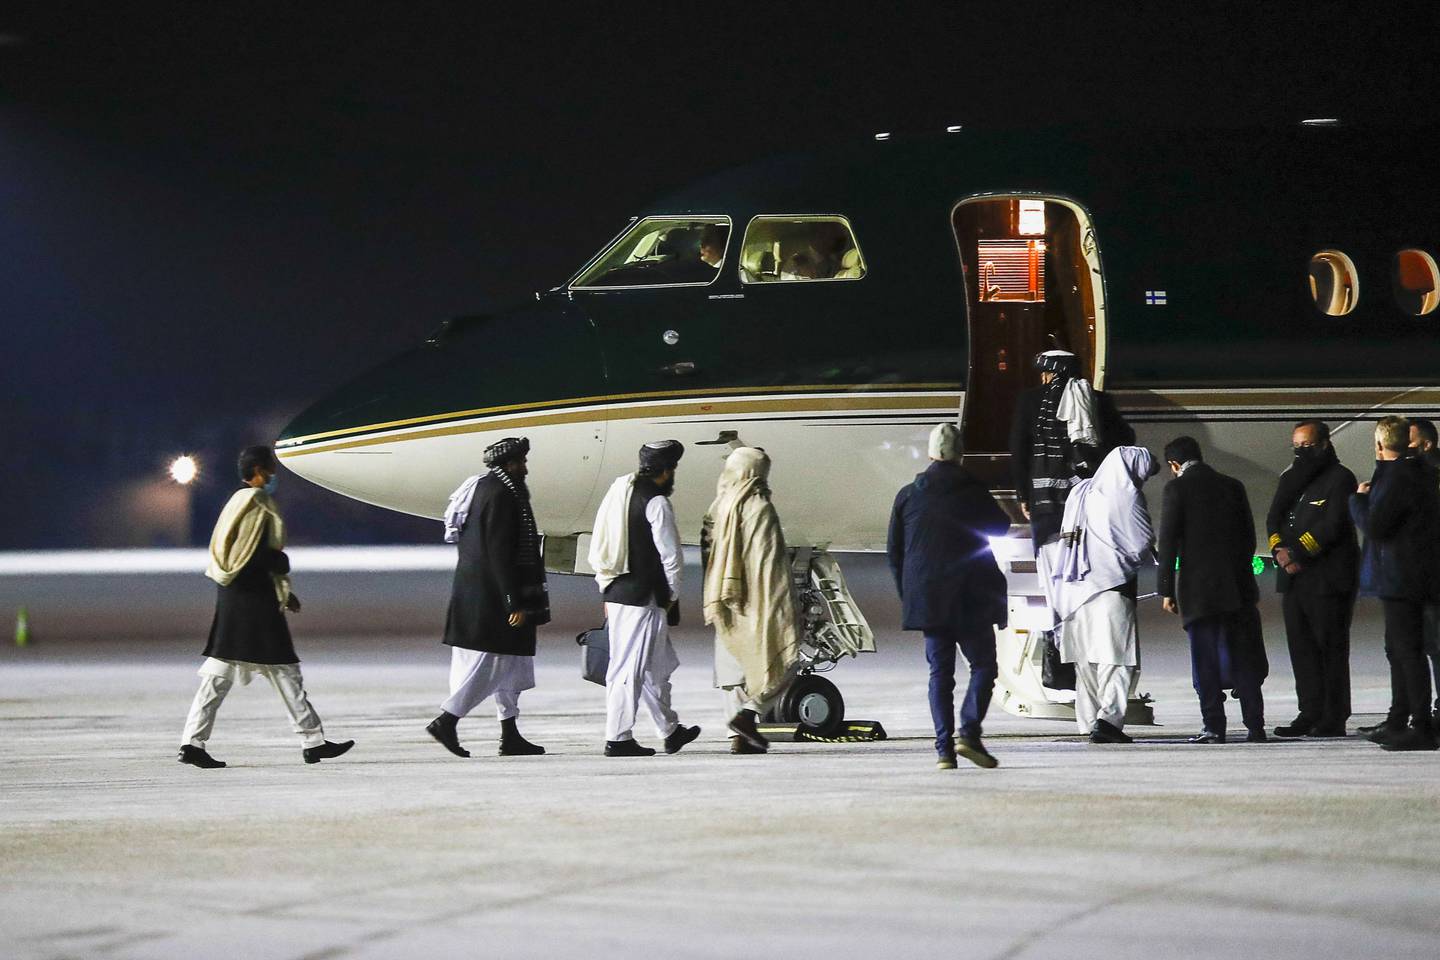 The Taliban's arrival in Oslo on a private jet angered many Norwegians. AFP